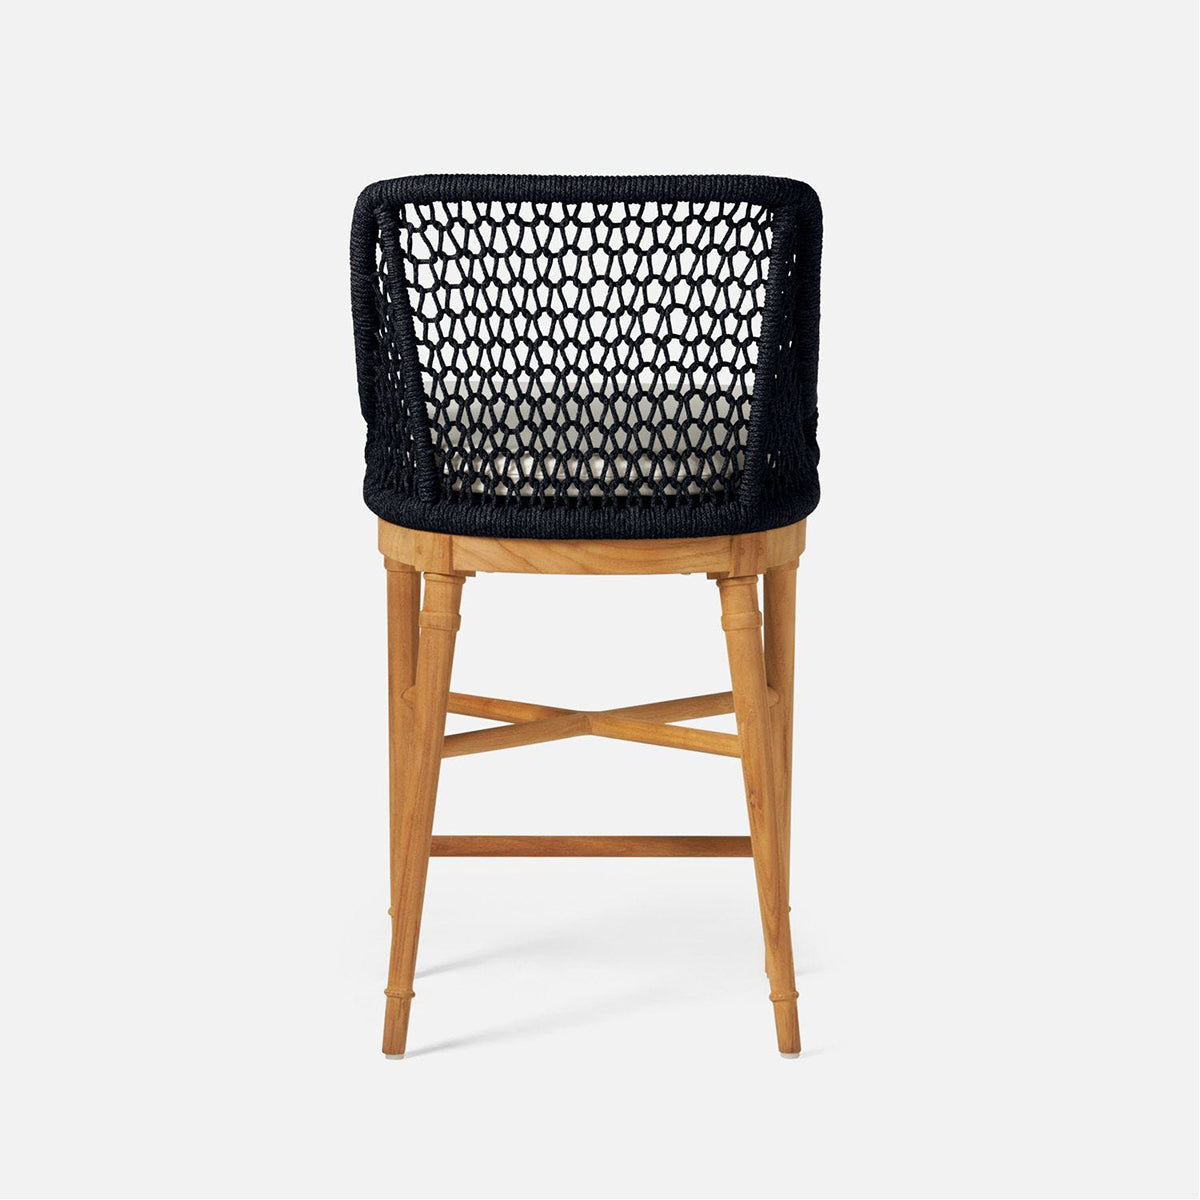 Made Goods Chadwick Woven Rope Outdoor Counter Stool in Clyde Fabric